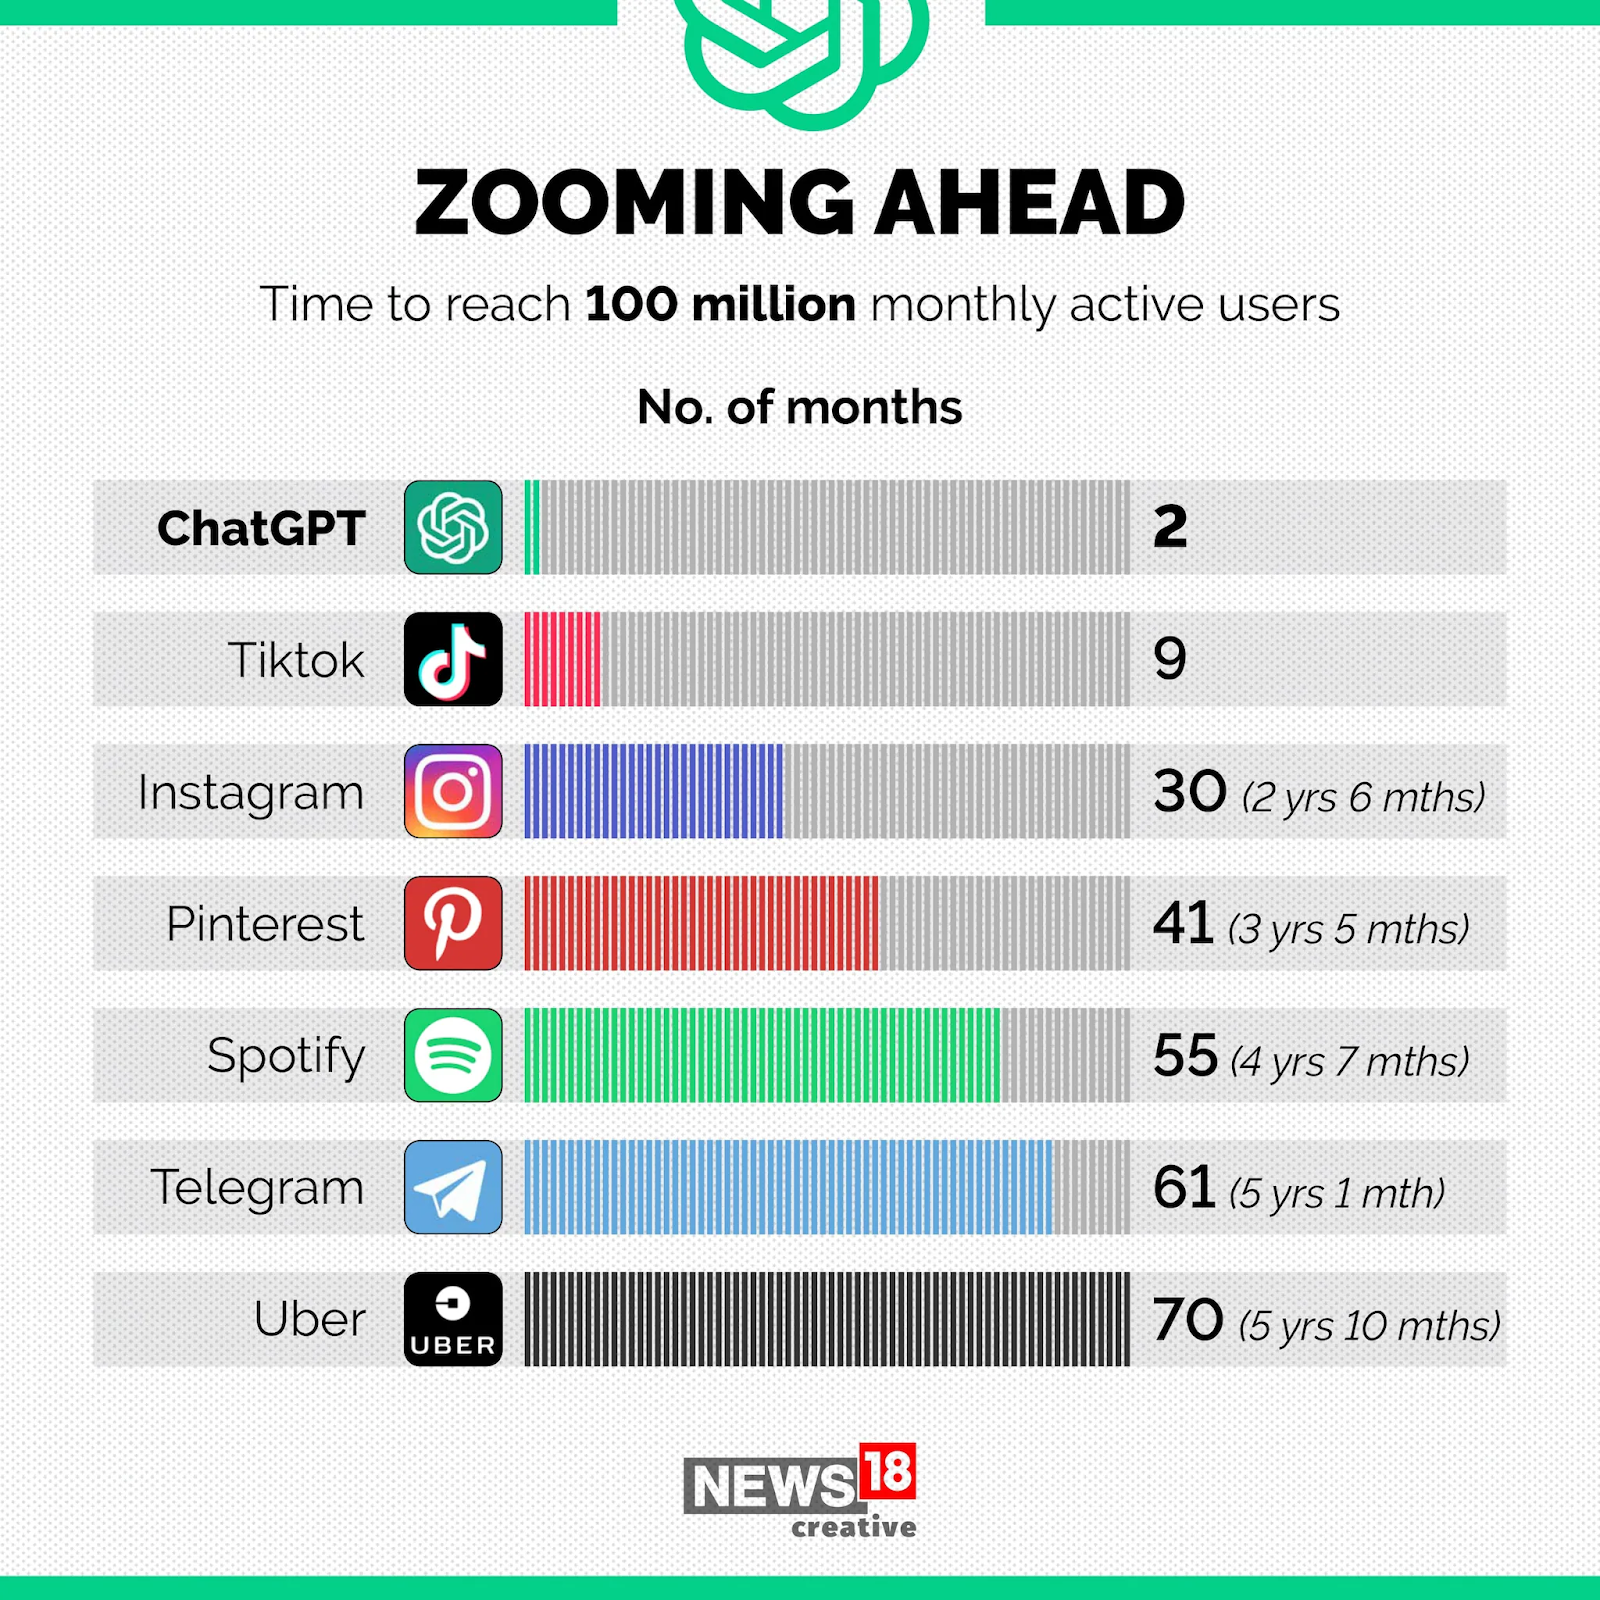 An infographic that show how many months major tech companies took to achieve 100 million users. Instagram took 2 years and 6 months to reach this goal while ChatGPT took a mere two months.